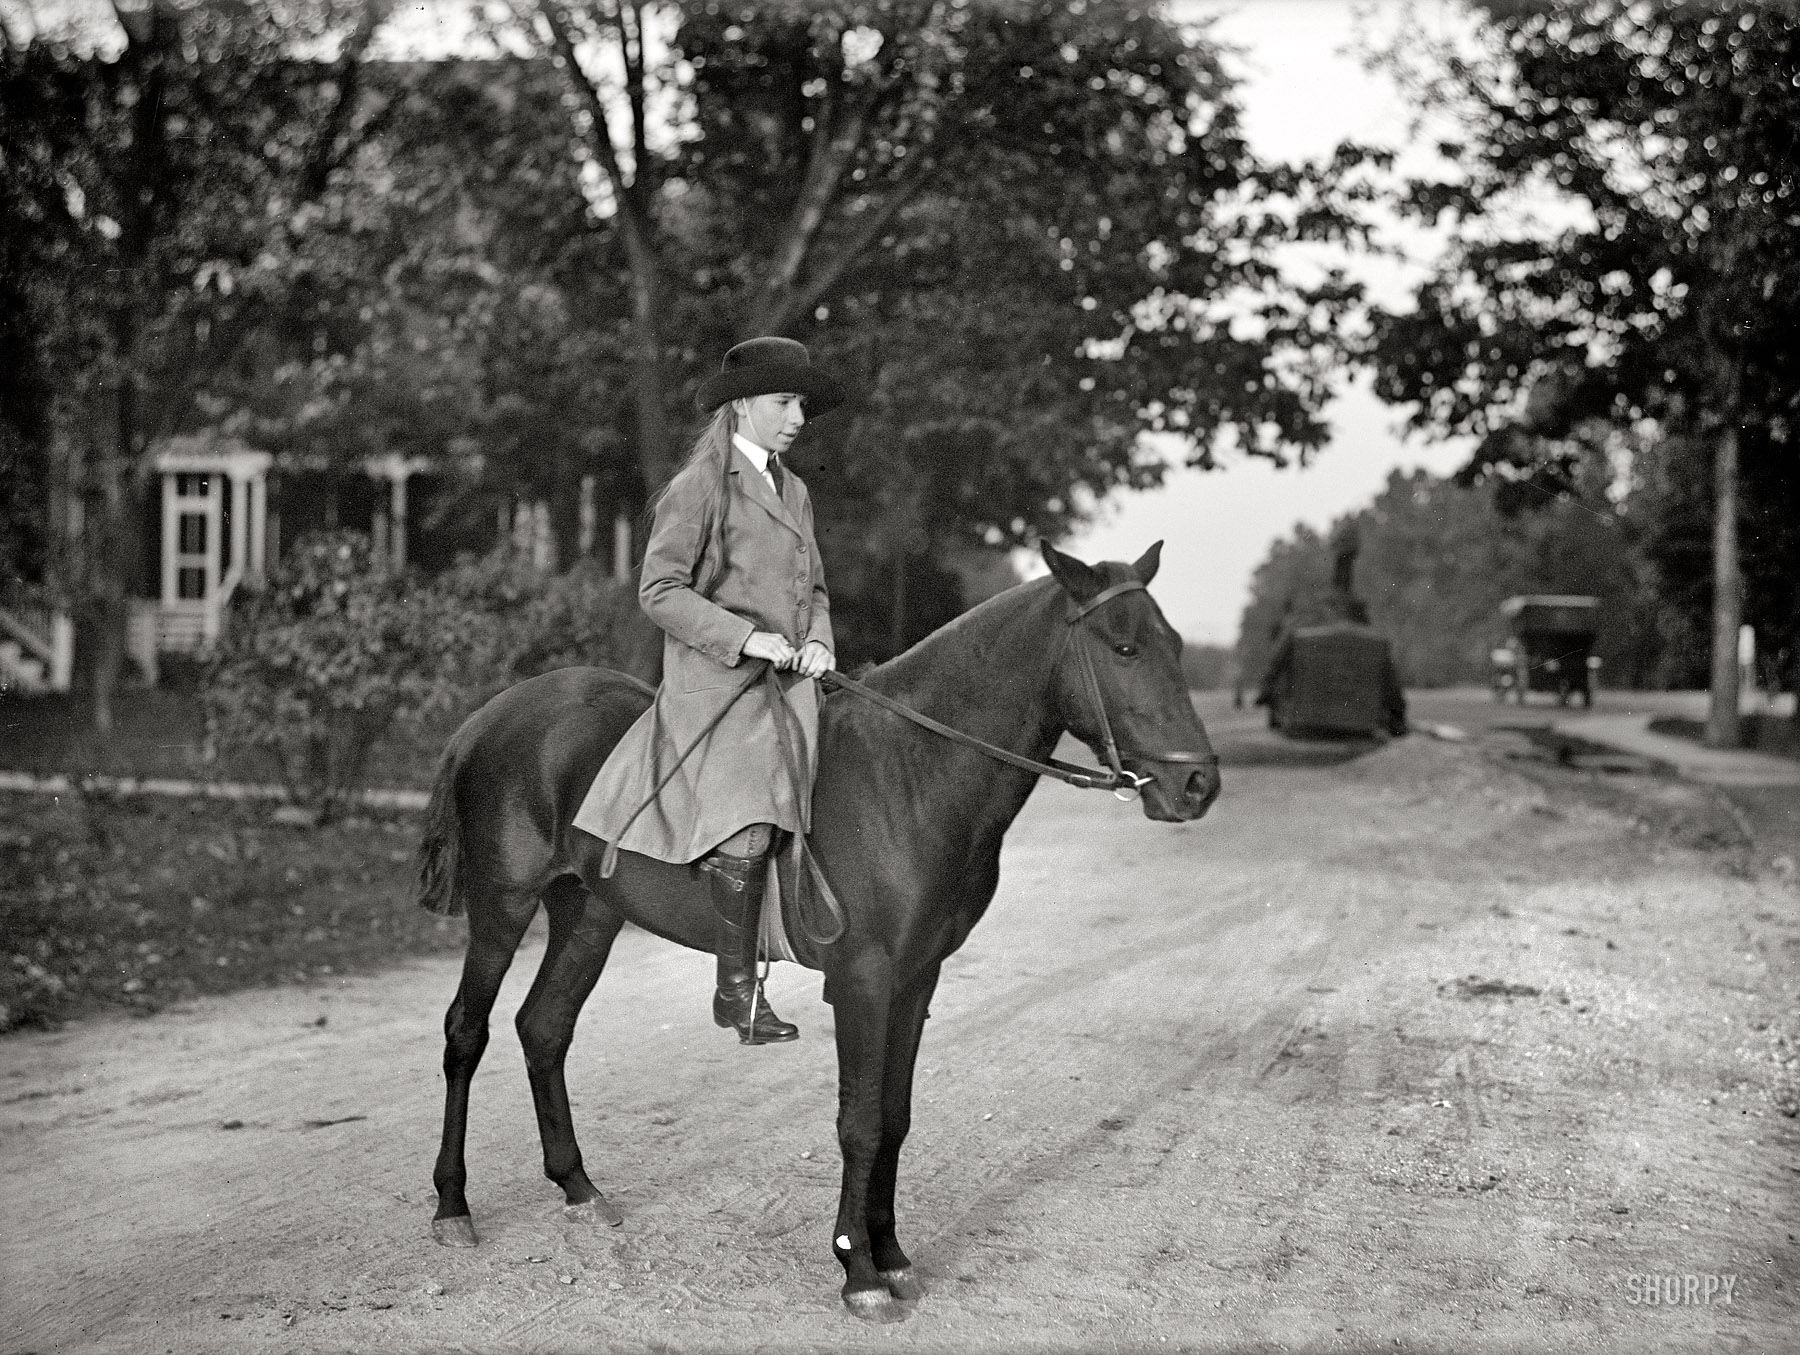 The second of seven 1913 glass negatives from the Harris & Ewing Collection captioned "Louisto Wood." It's Equestrian Tuesday at Shorpy! View full size.